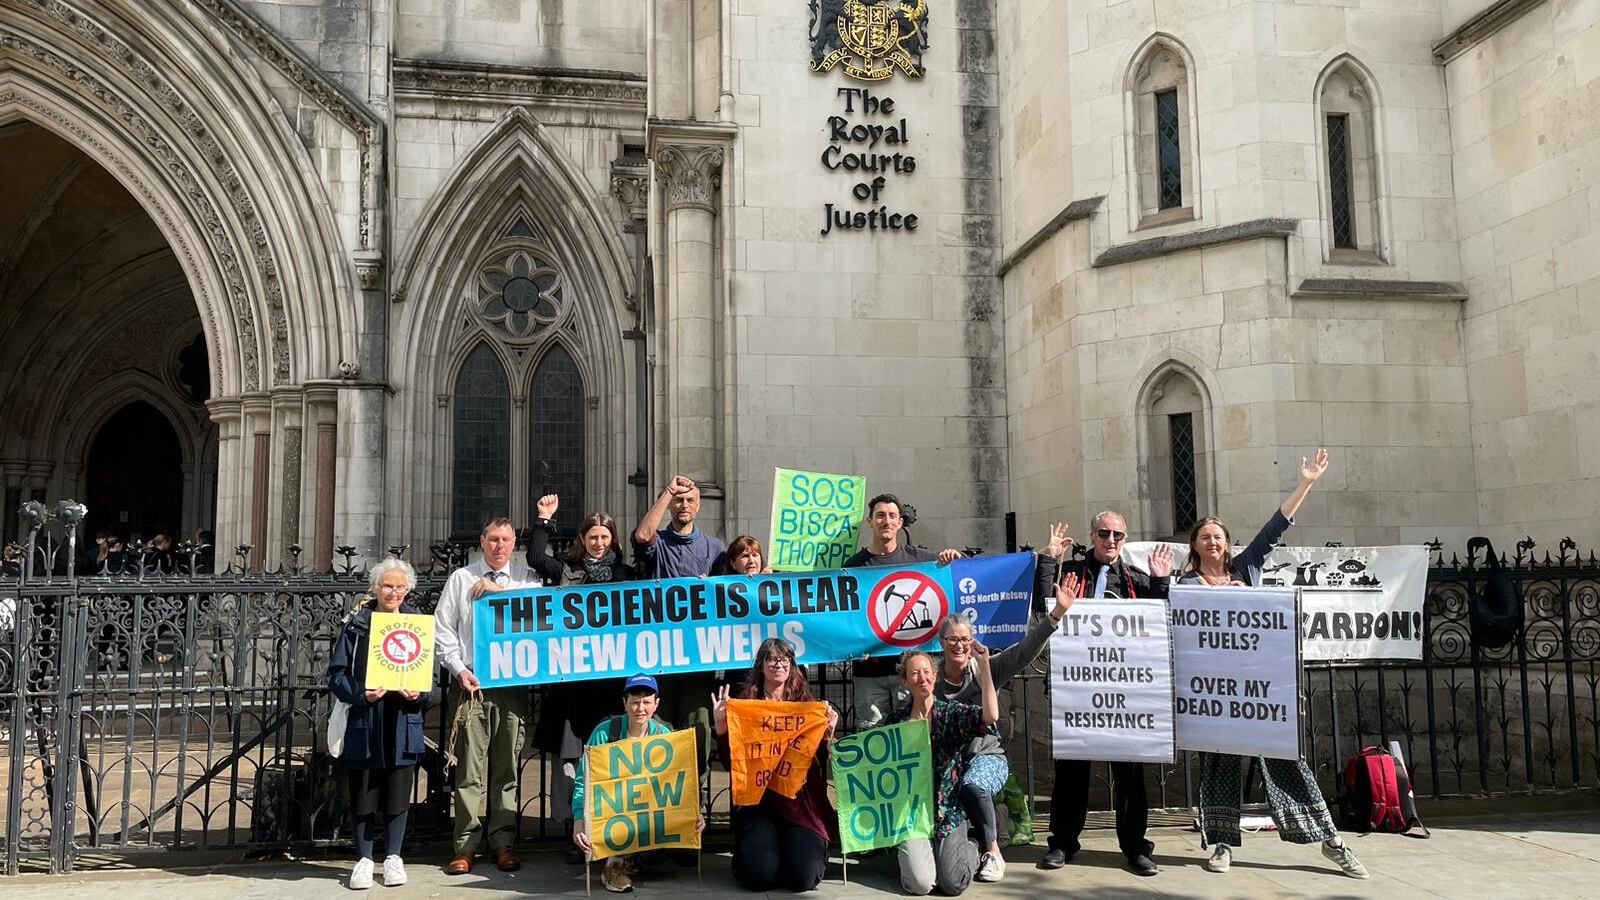 Protesters outside the Royal Courts of Justice, central London, who are challenging plans to drill for oil at an Area of Outstanding Natural Beauty in the Lincolnshire Wolds